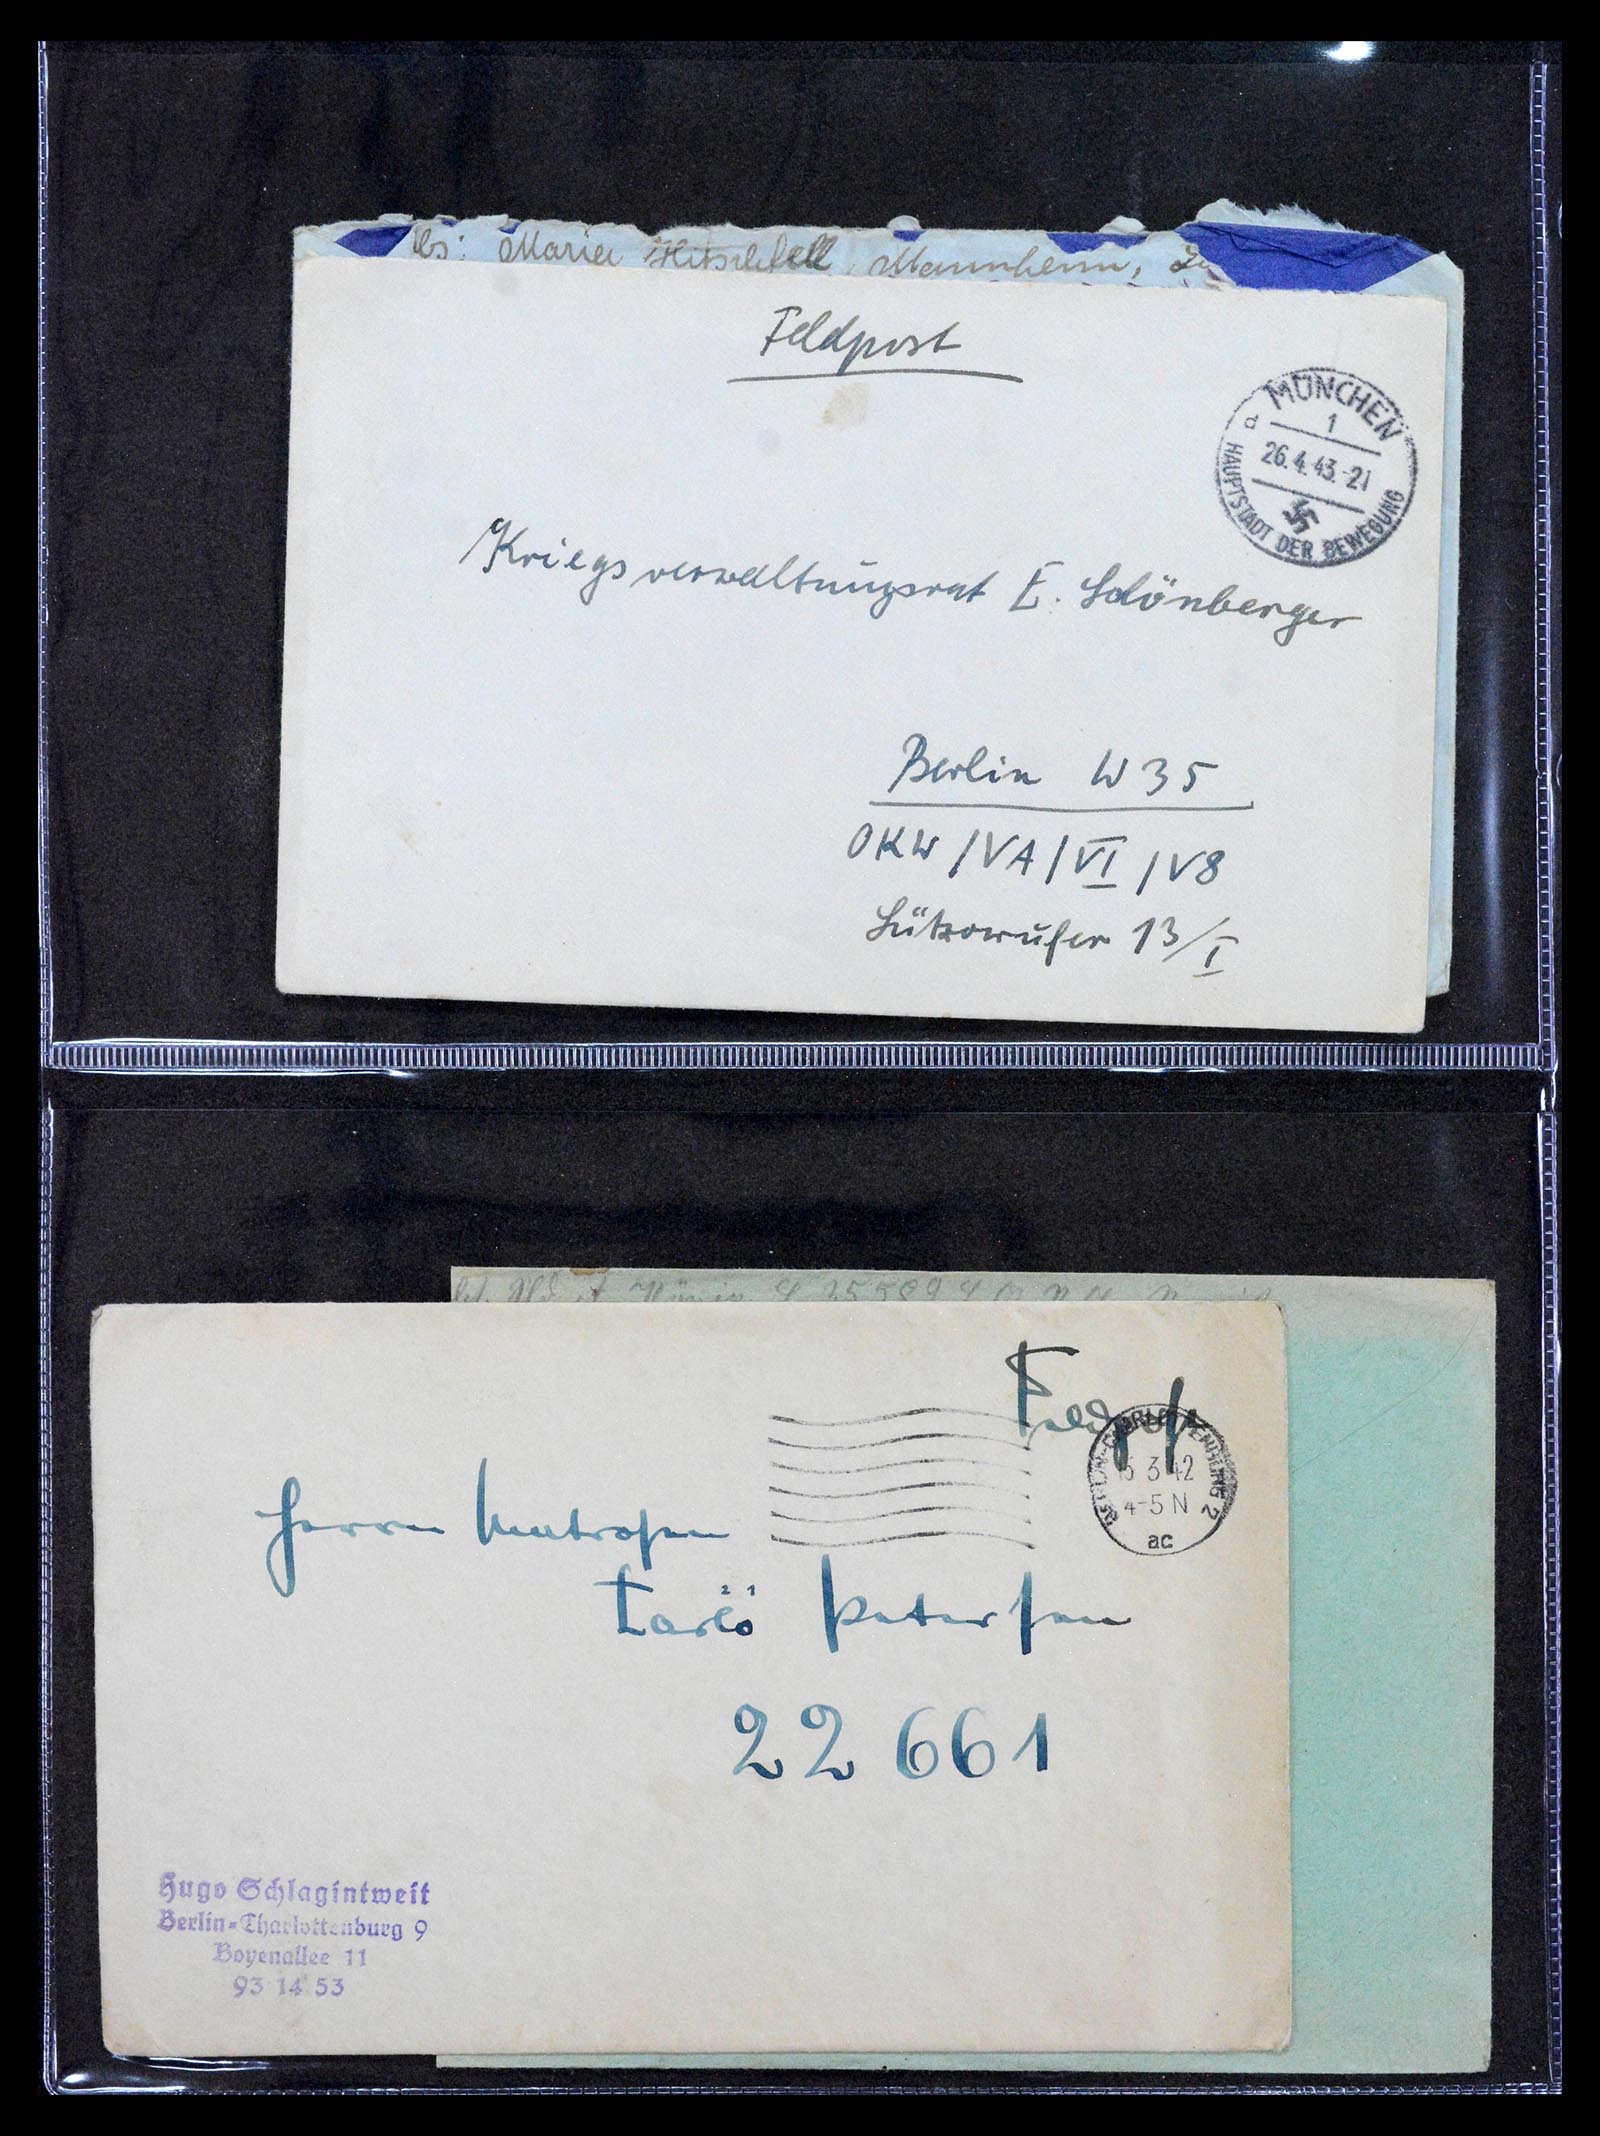 38646 0065 - Stamp collection 38646 Germany covers and cards 1940-1945.